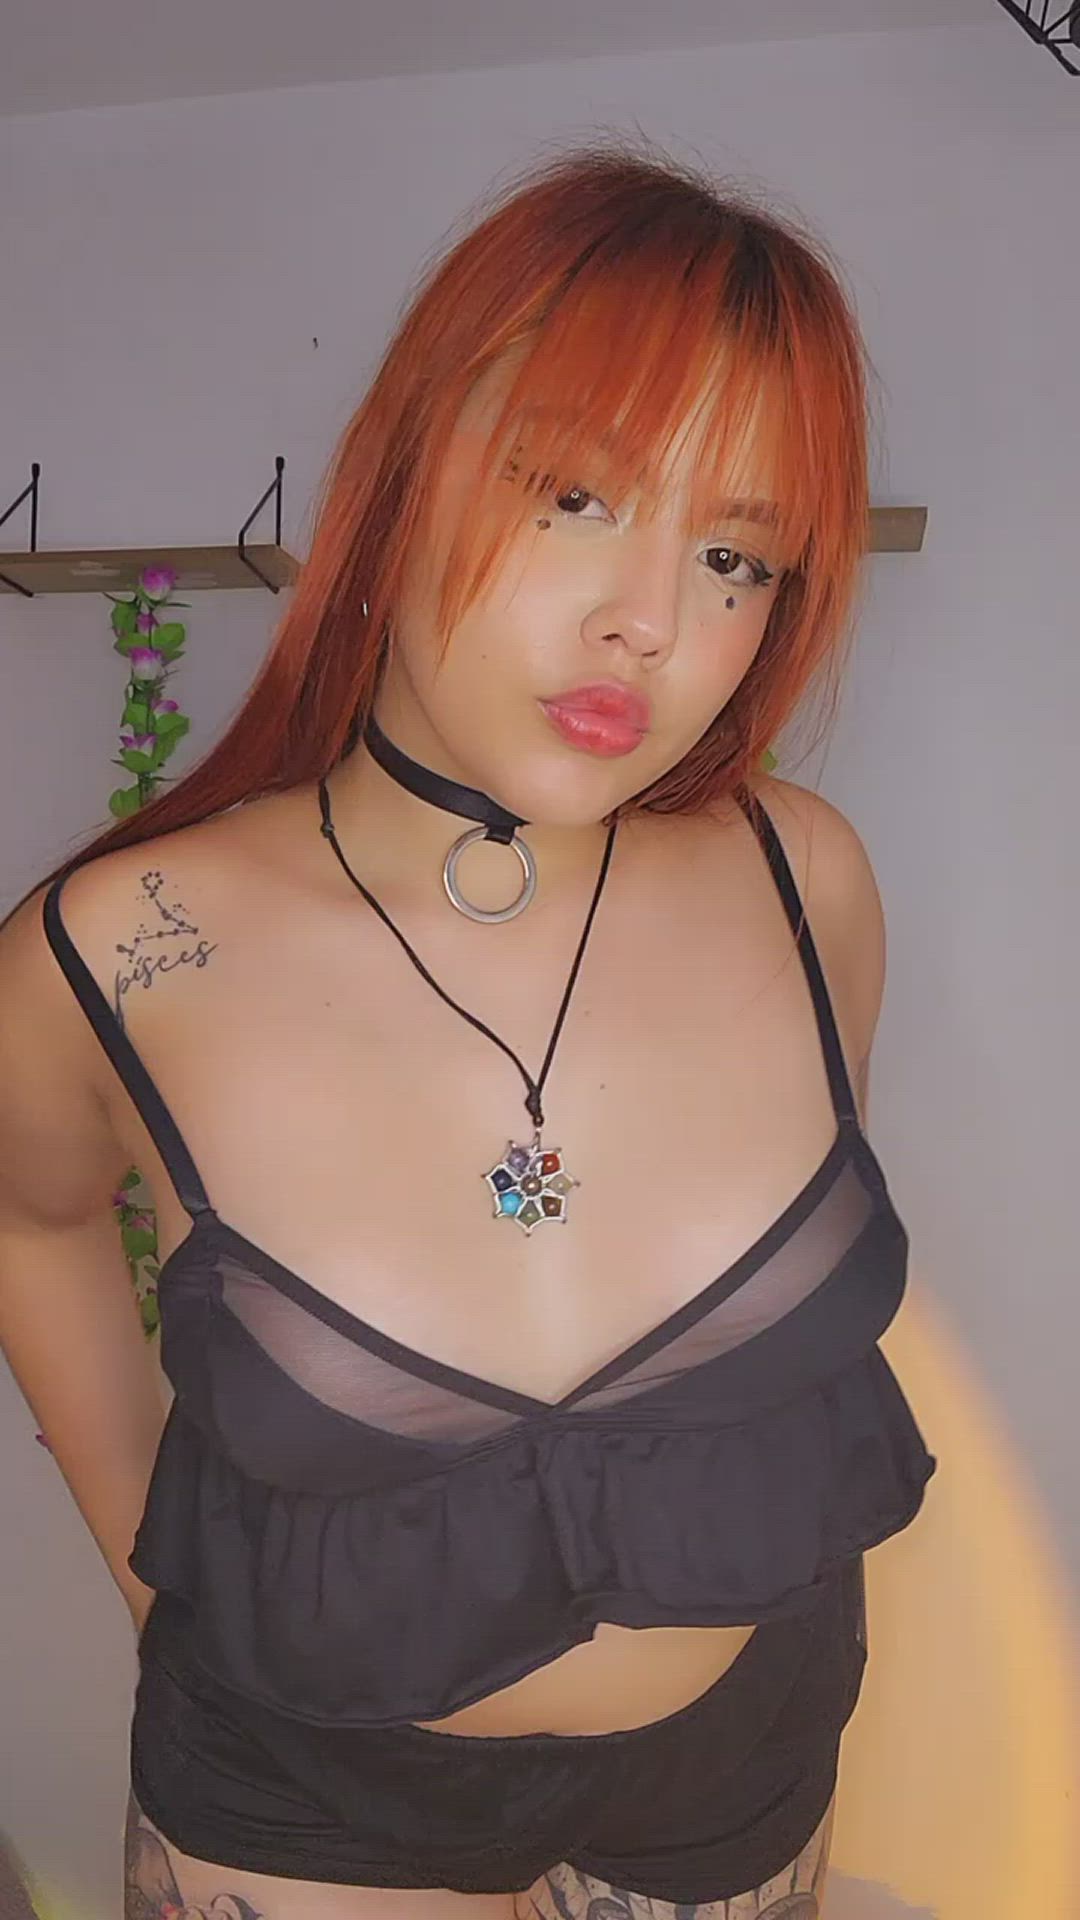 Amateur porn video with onlyfans model renatavera <strong>@renatavera</strong>